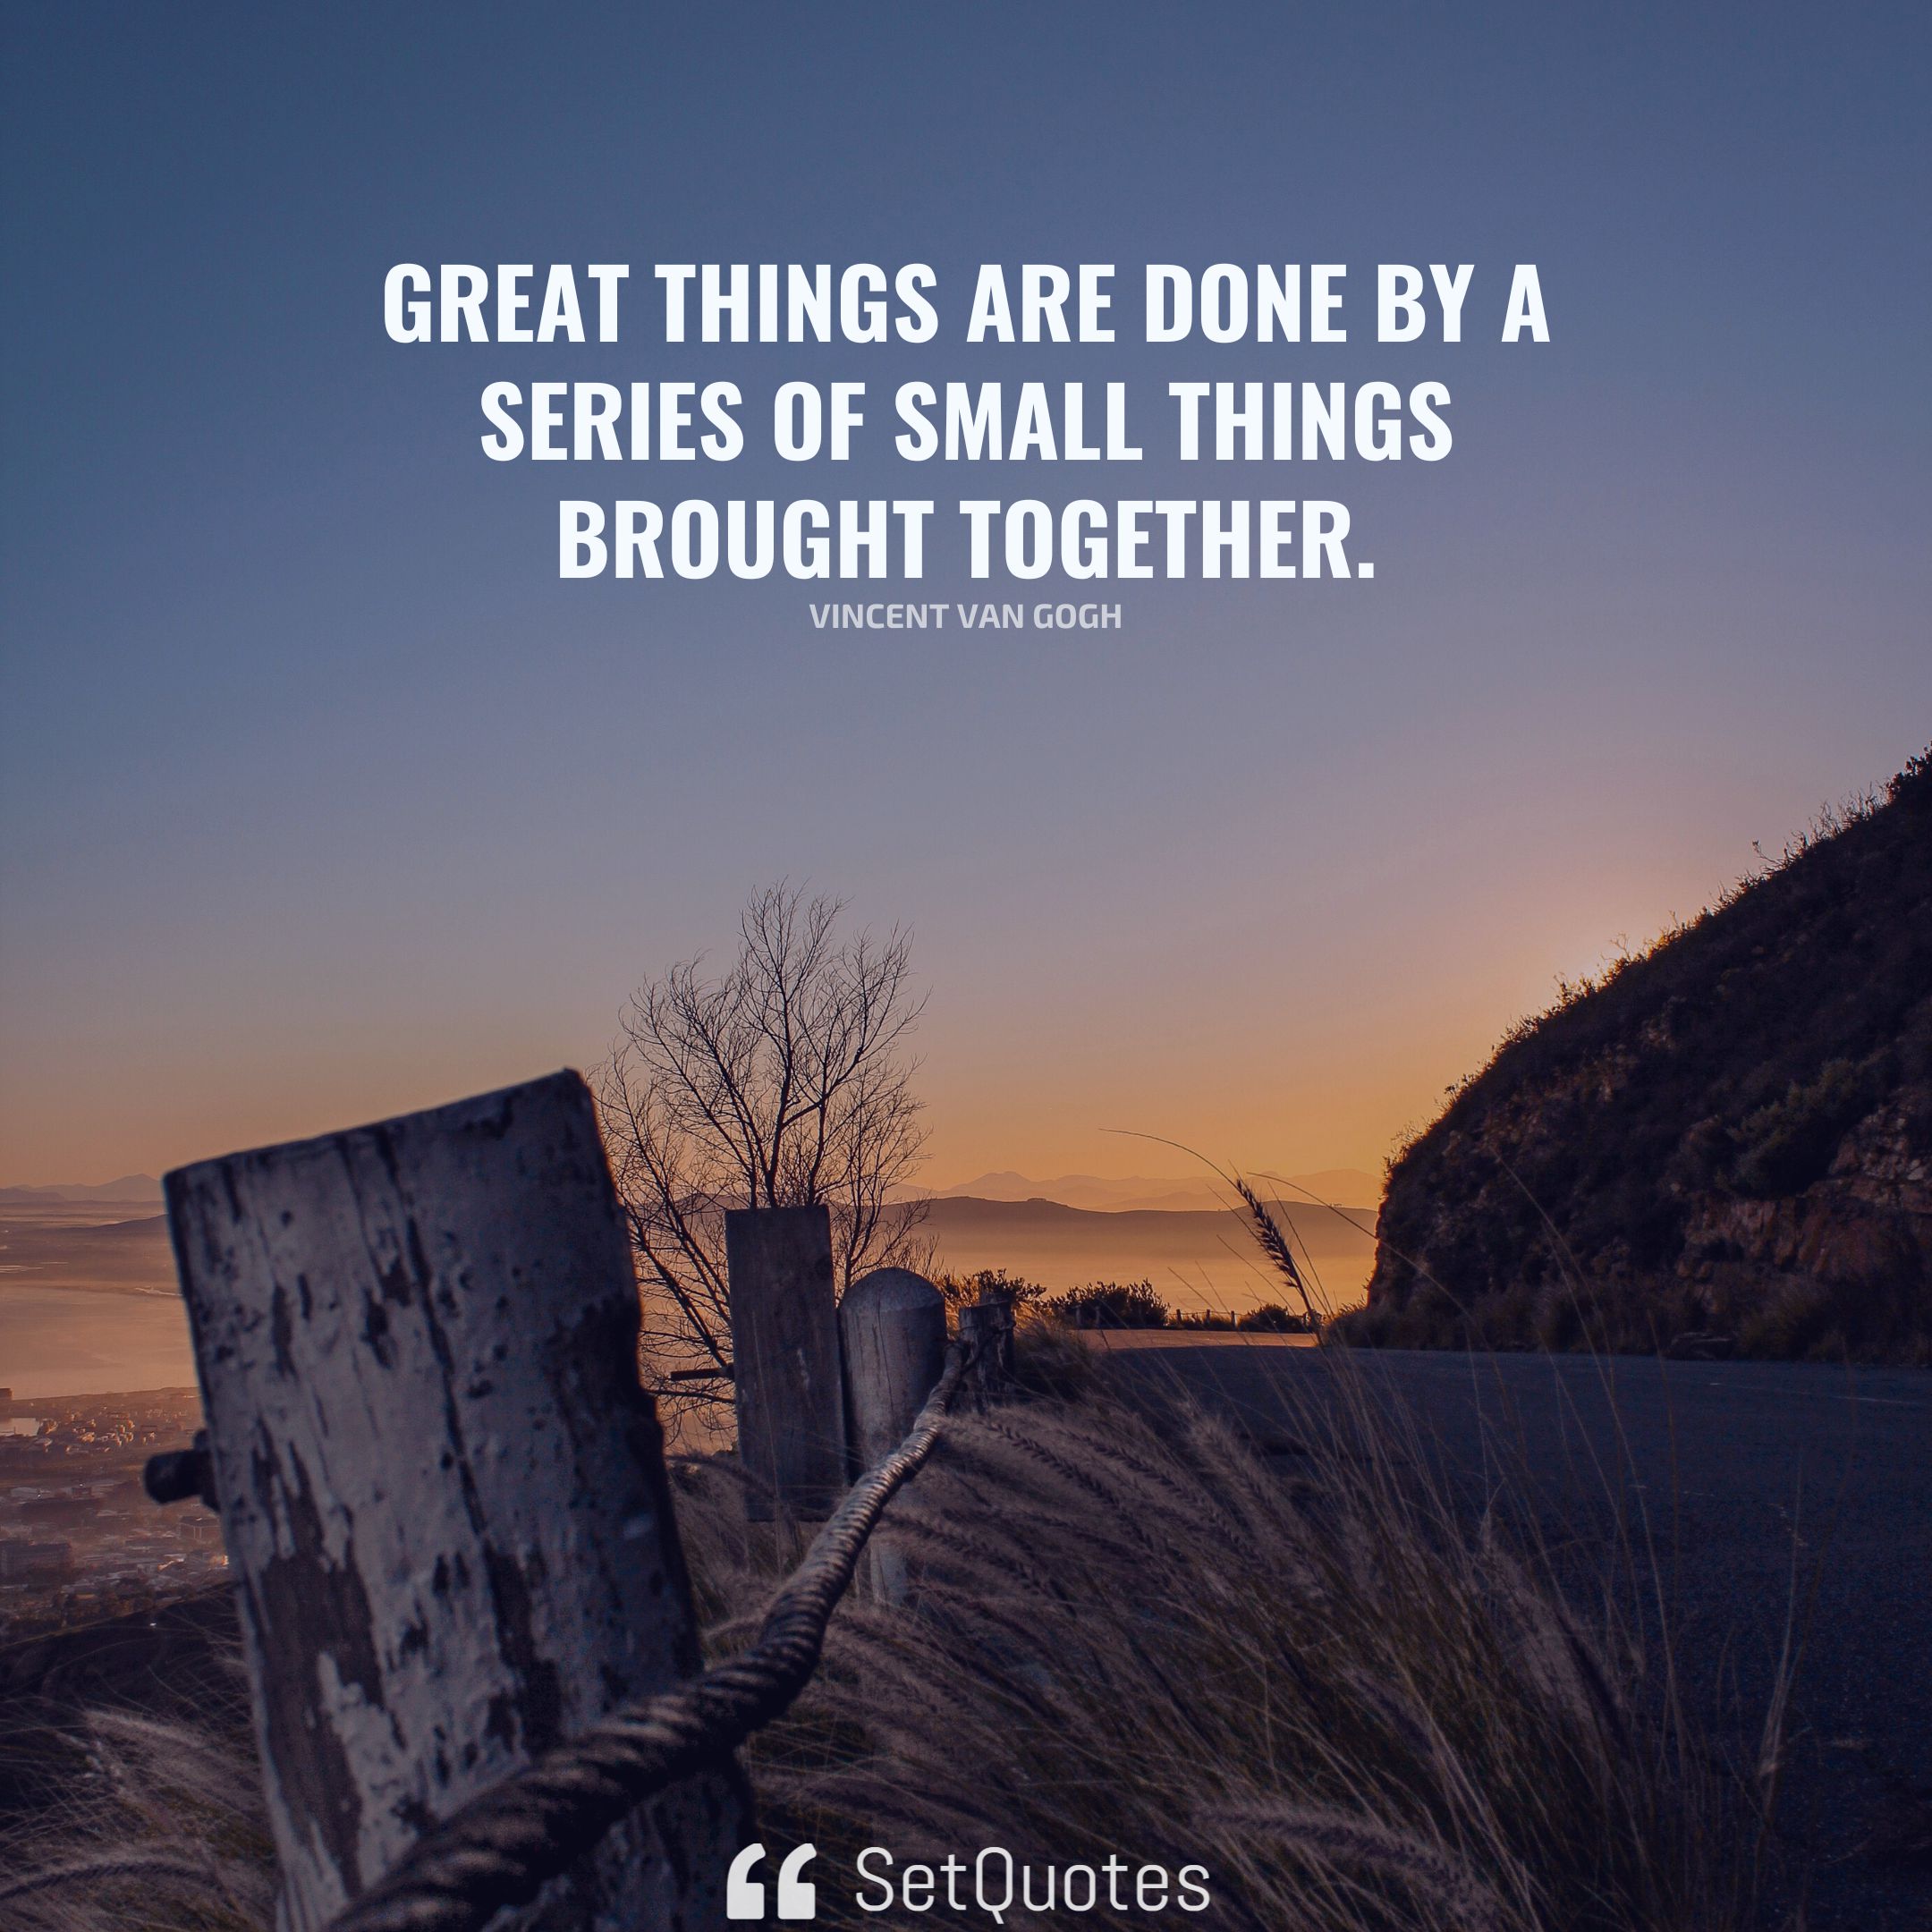 Great things are done by a series of small things brought together. - Vincent Van Gogh (By SetQuotes)